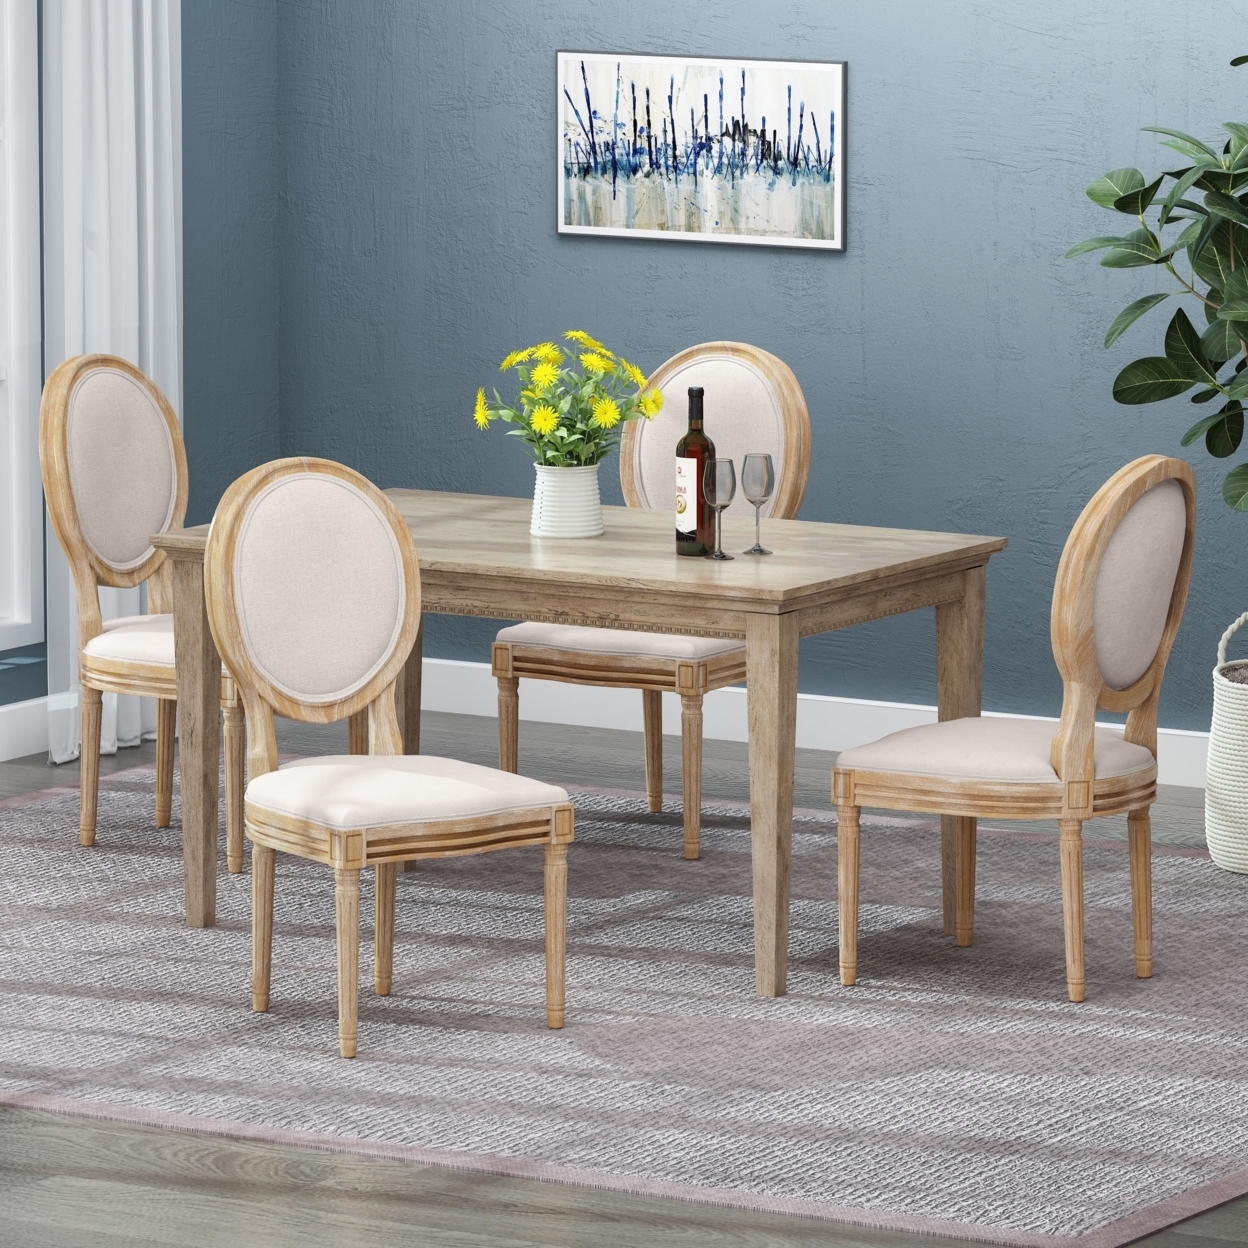 Lariya French Country Dining Chairs (Set Of 4) - Beige/natural